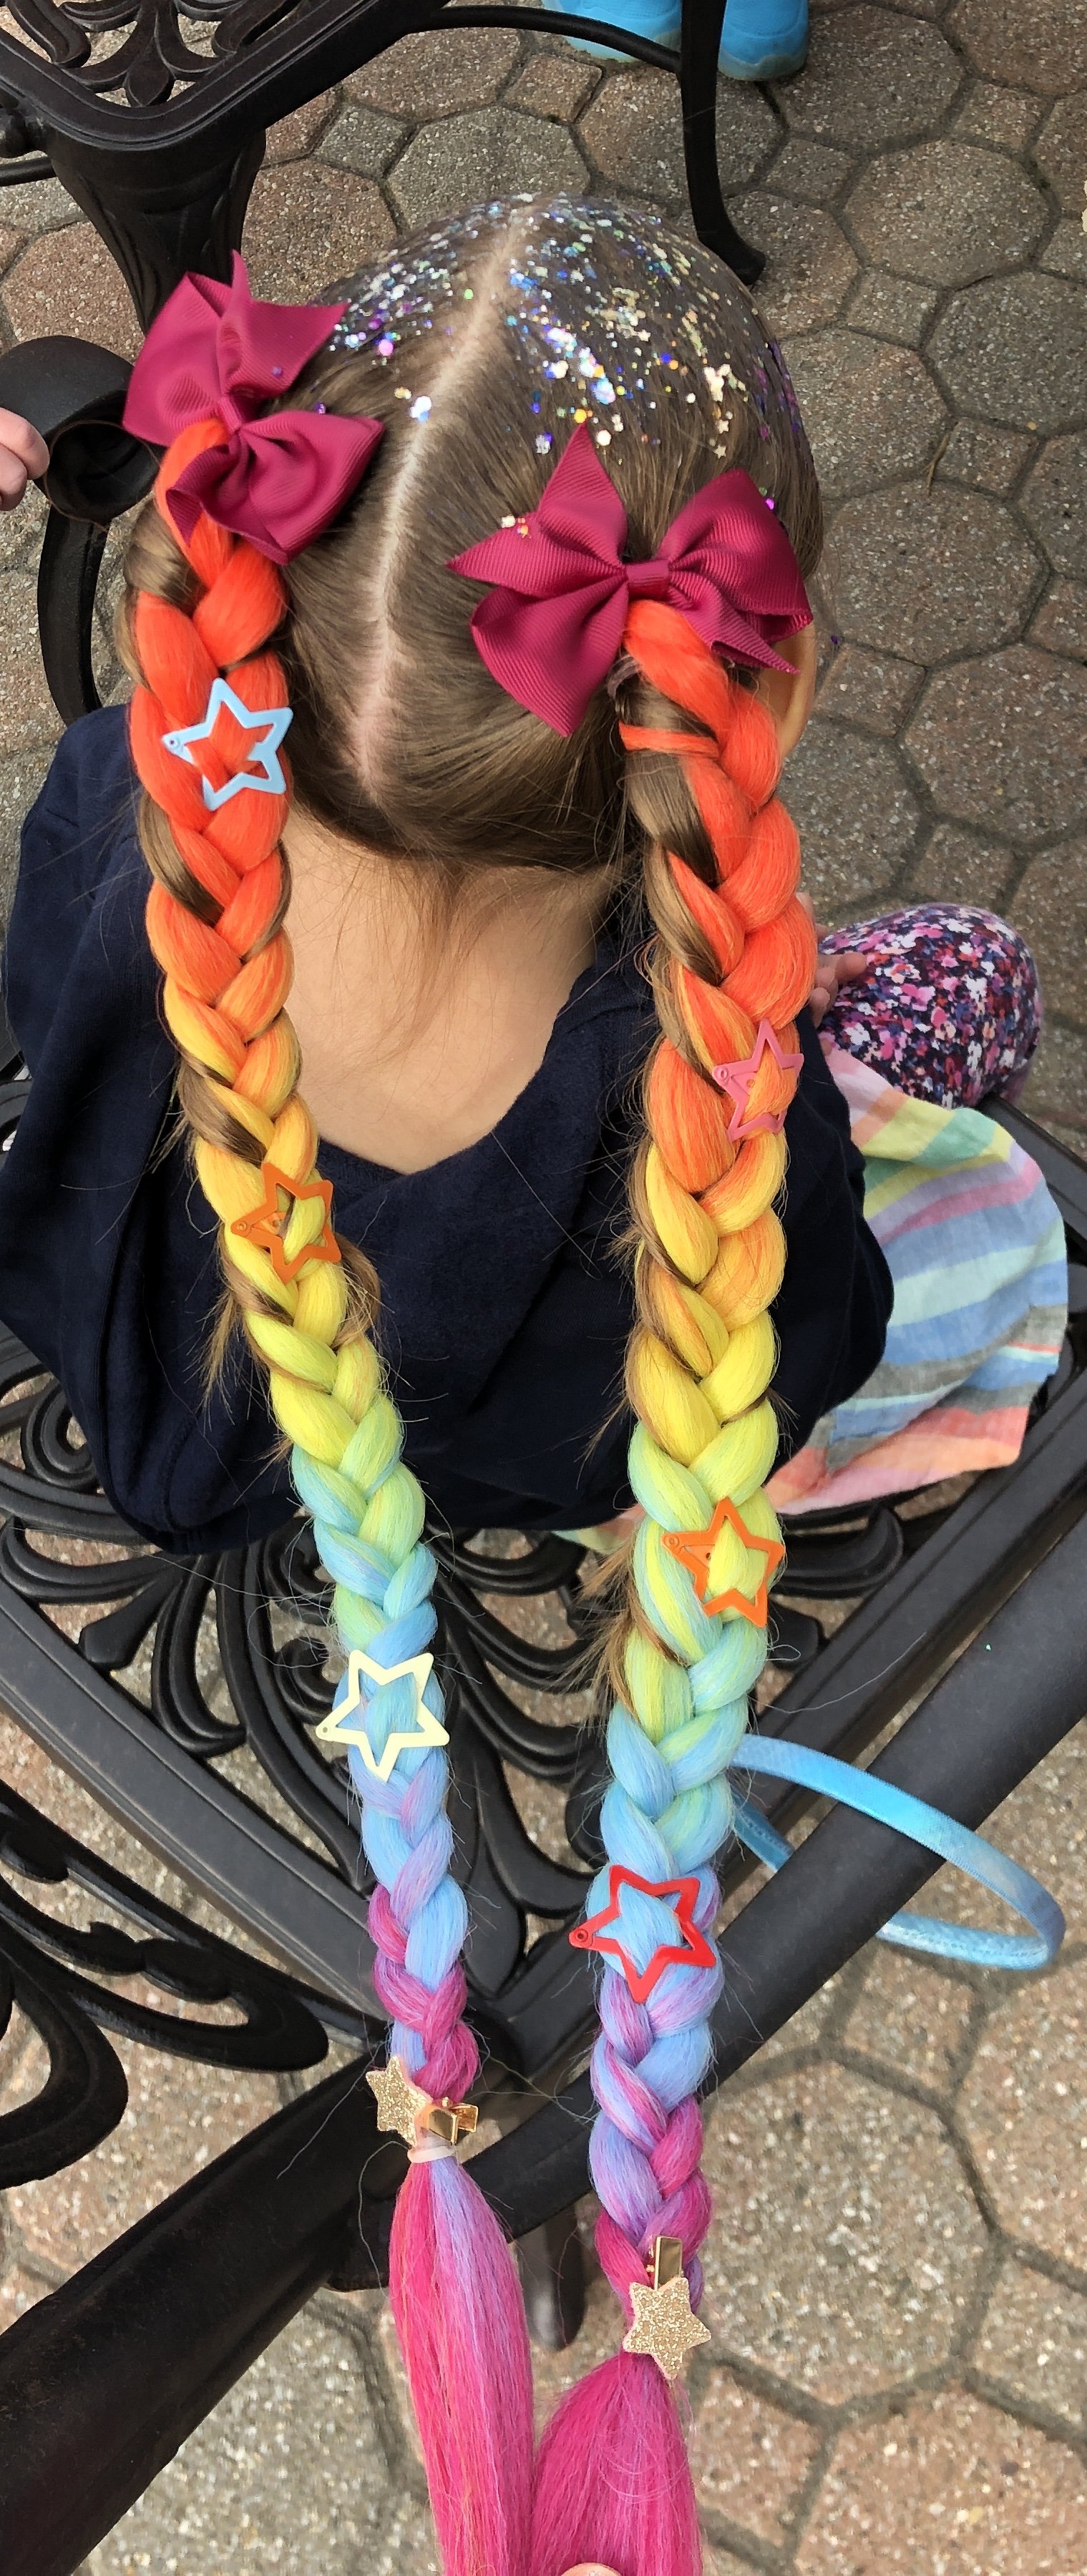 Hair Braiding Party Kit for 8